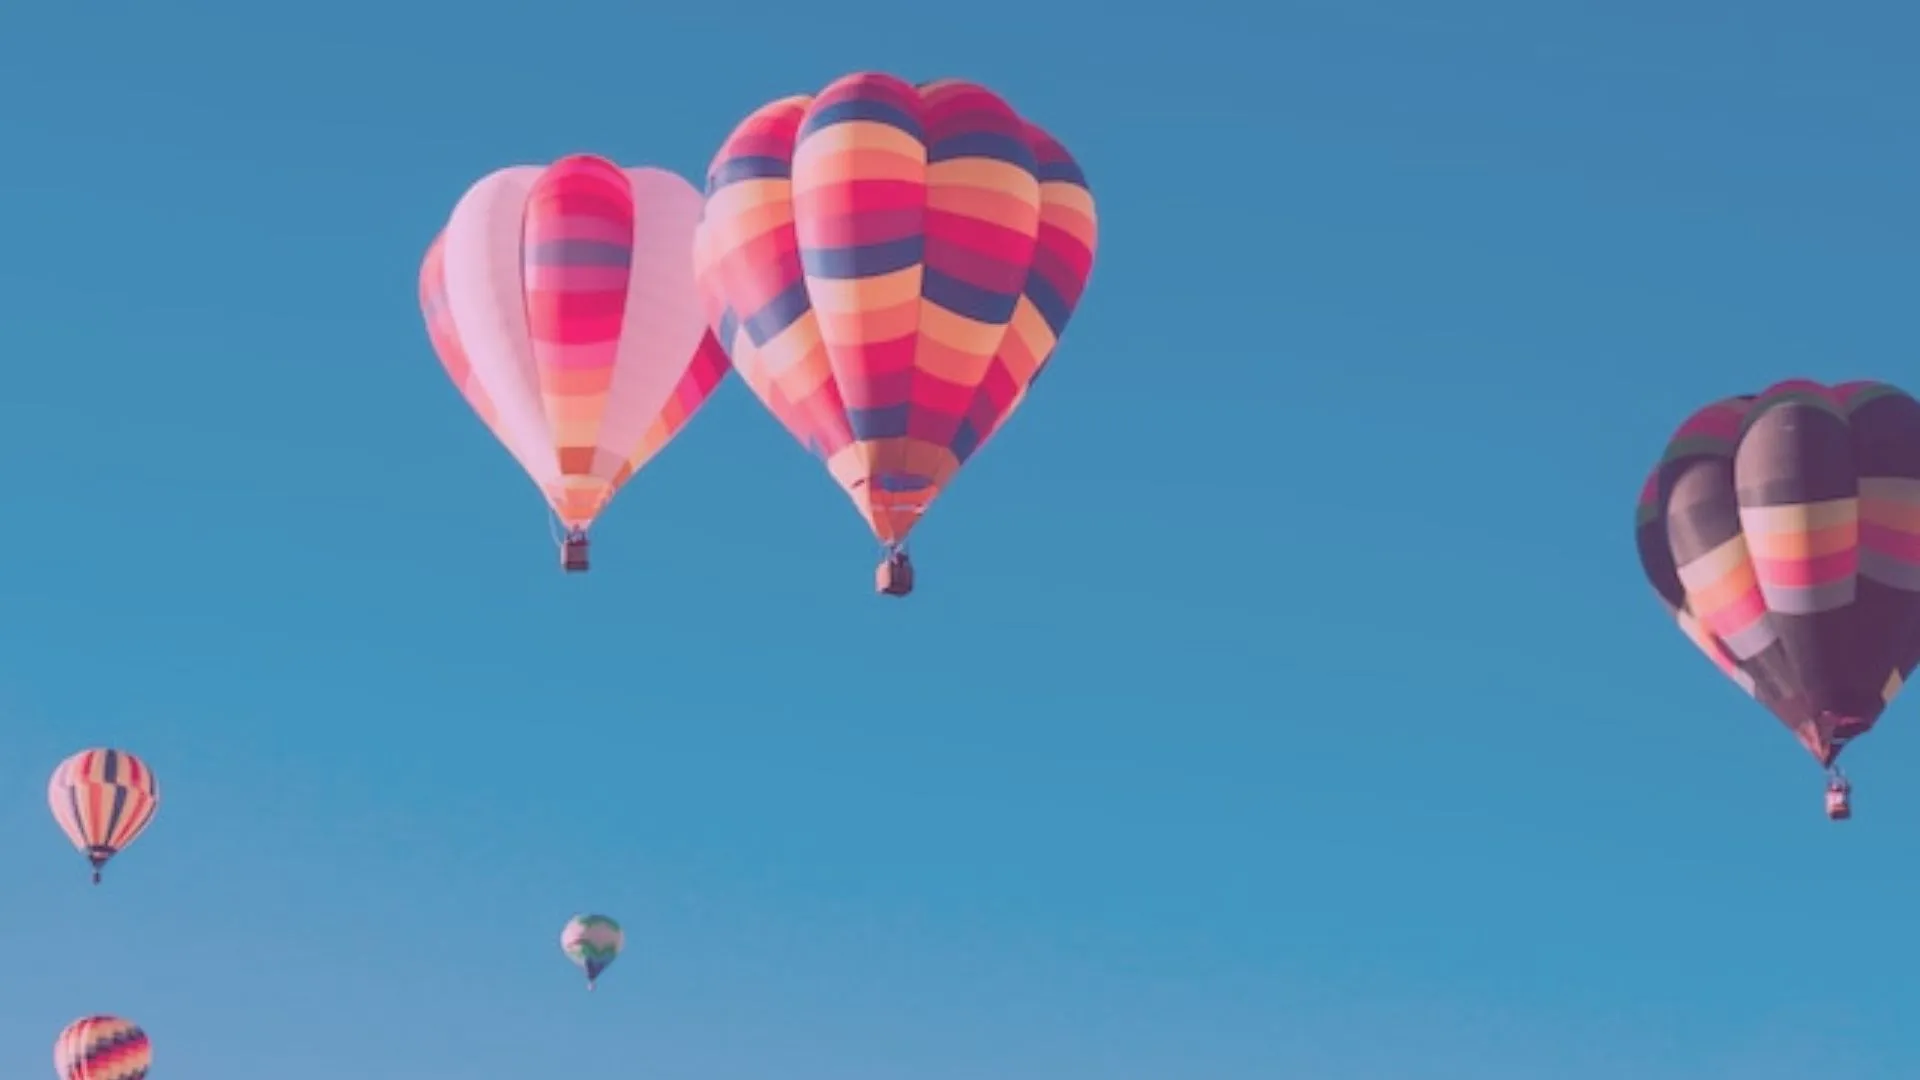 Hot air balloons in the air. They represent different product visions.